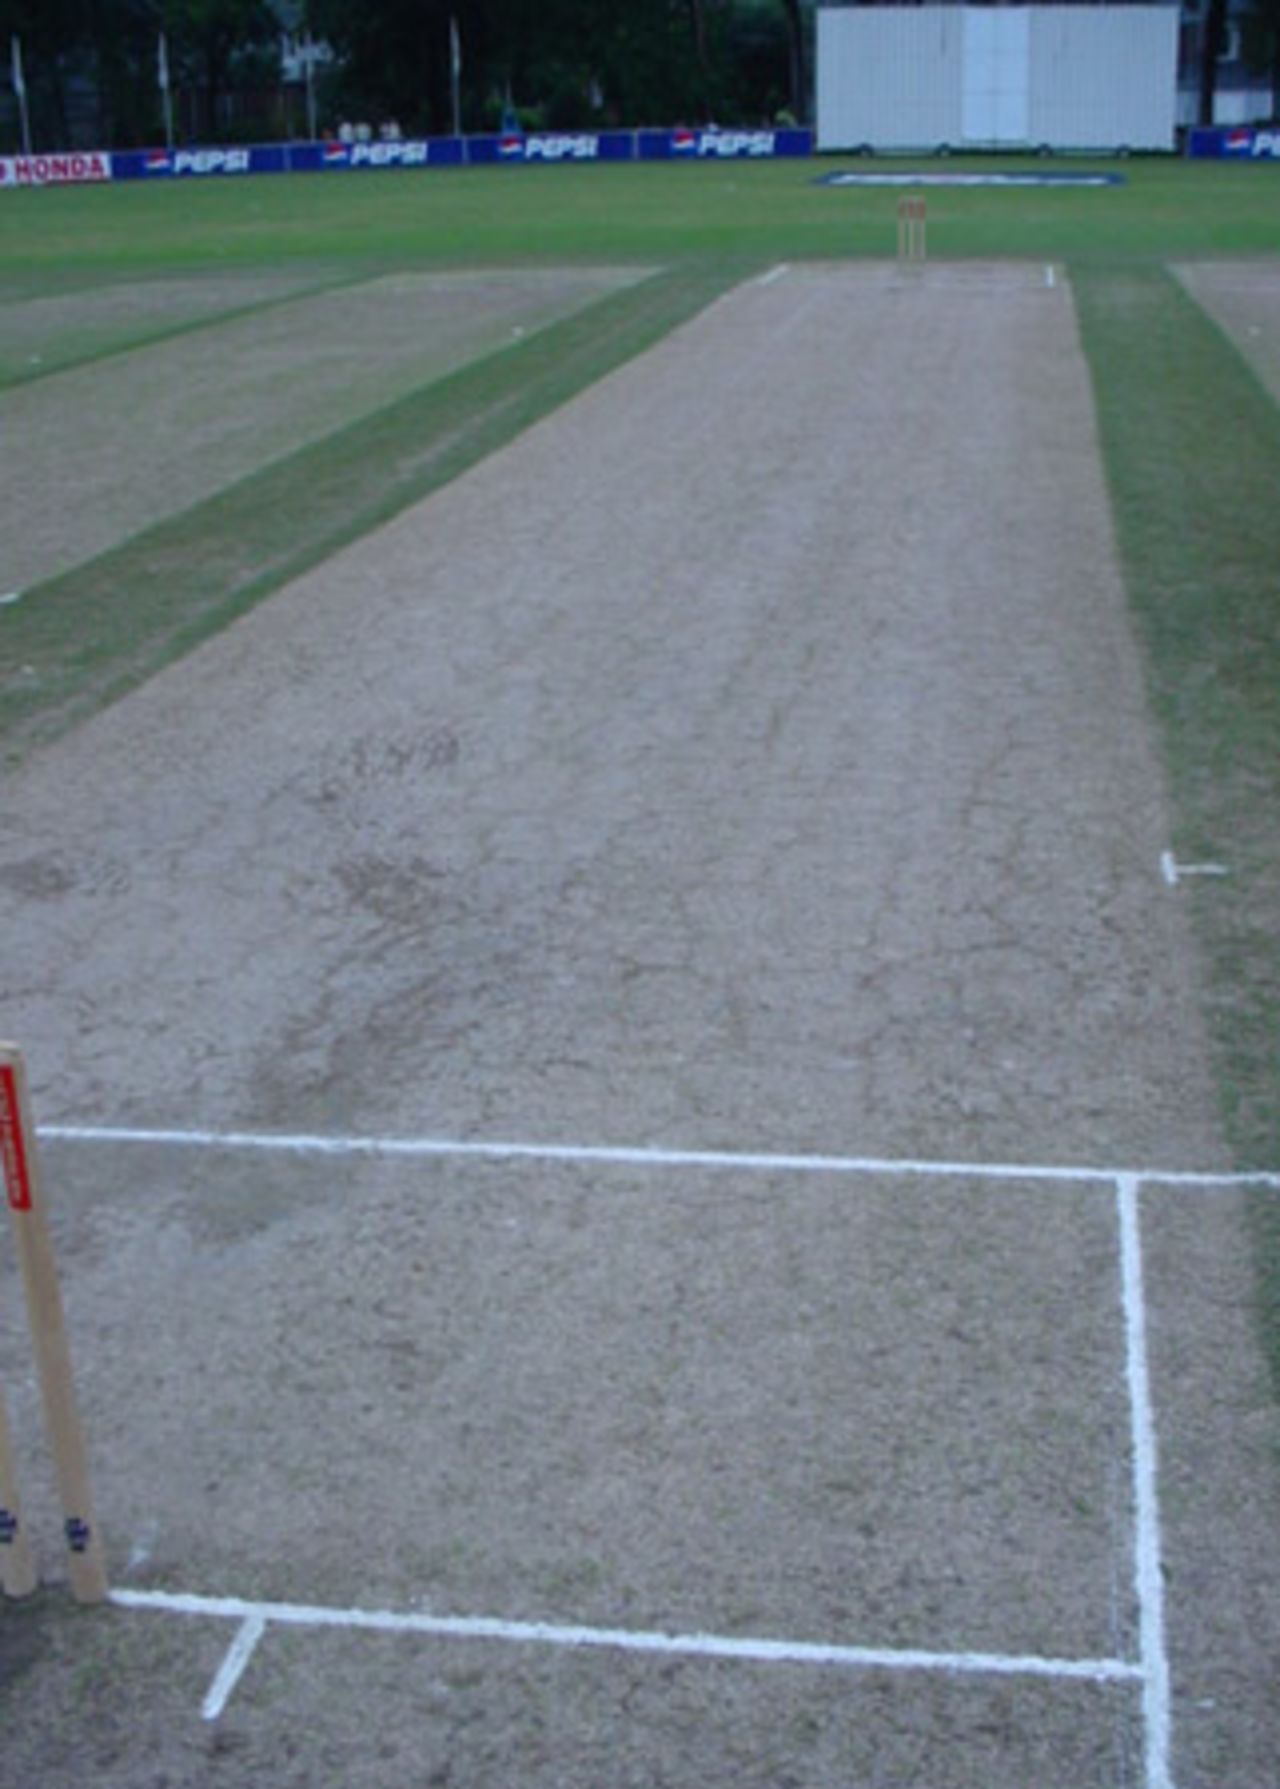 The pitch before the ICC Trophy World Cup Qualifying Final. ICC Trophy 2001: Canada v Scotland at Toronto Cricket, Skating and Curling Club, 17 July 2001.